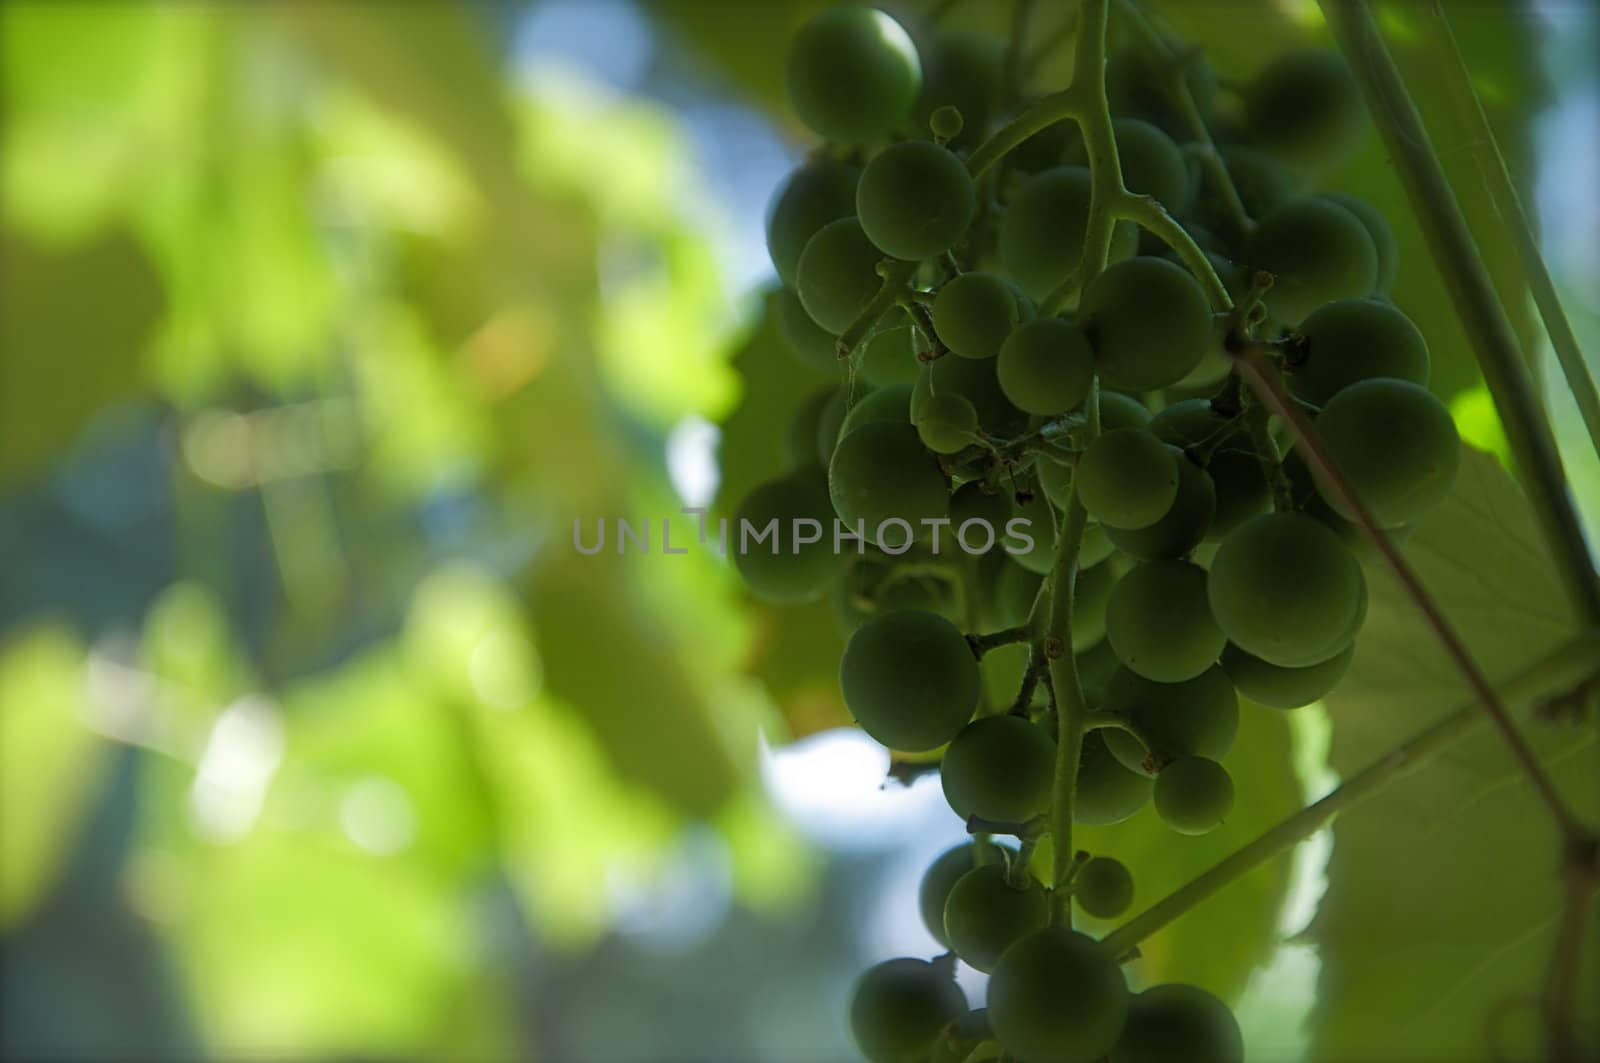 Green Grapes and Leaf Background by gilmourbto2001